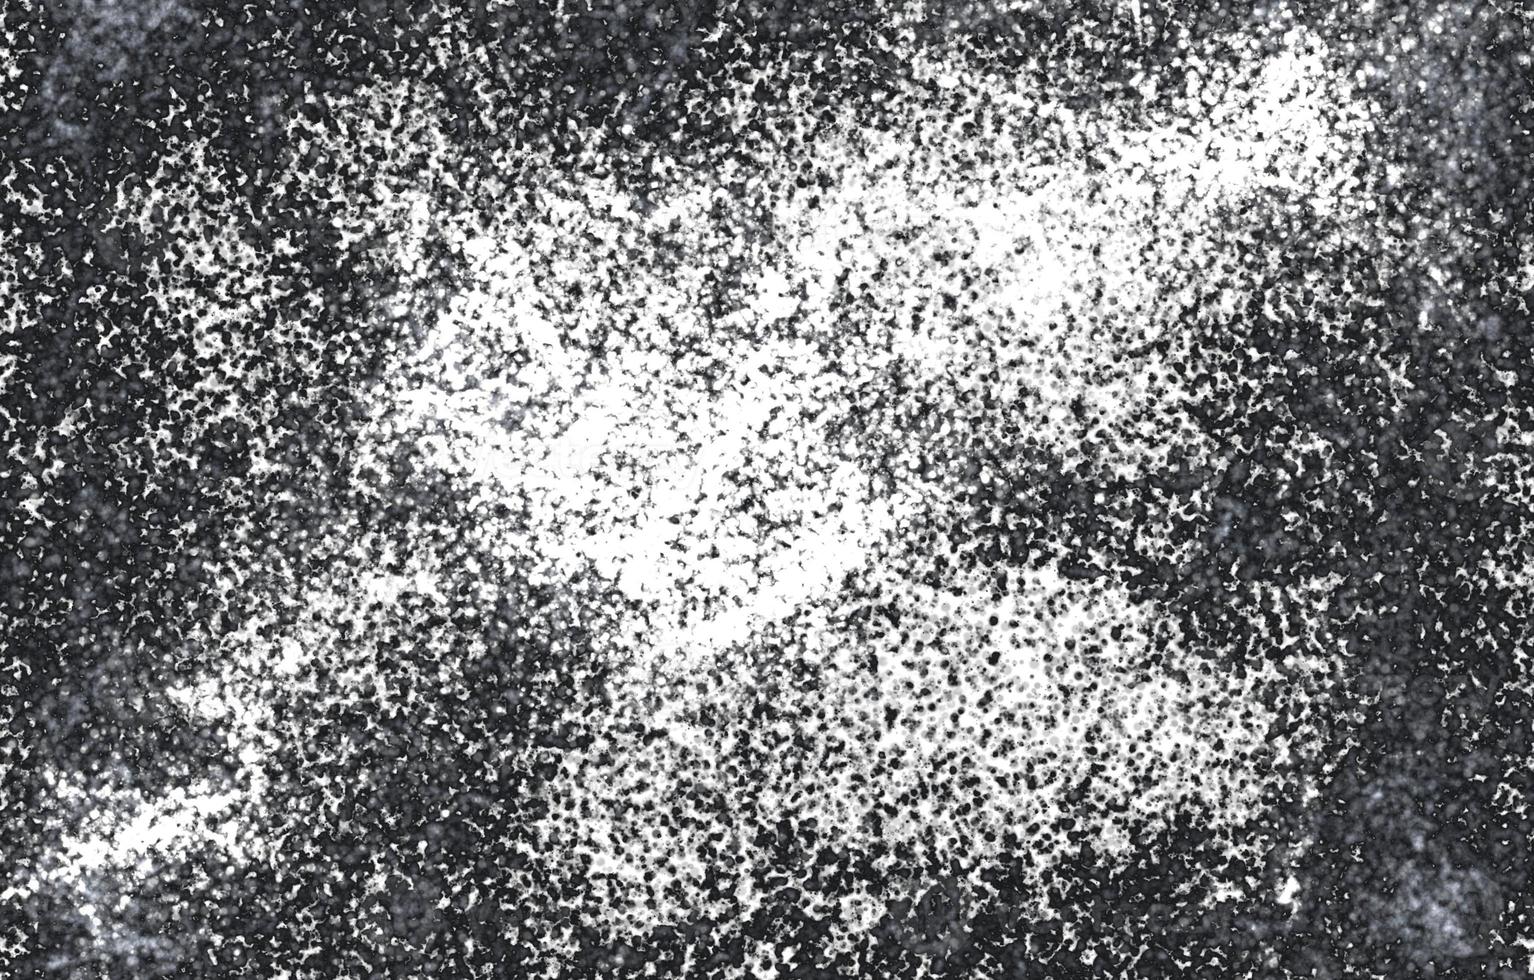 Grunge Black and White Distress Texture.Grunge rough dirty background.For posters, banners, retro and urban designs. photo